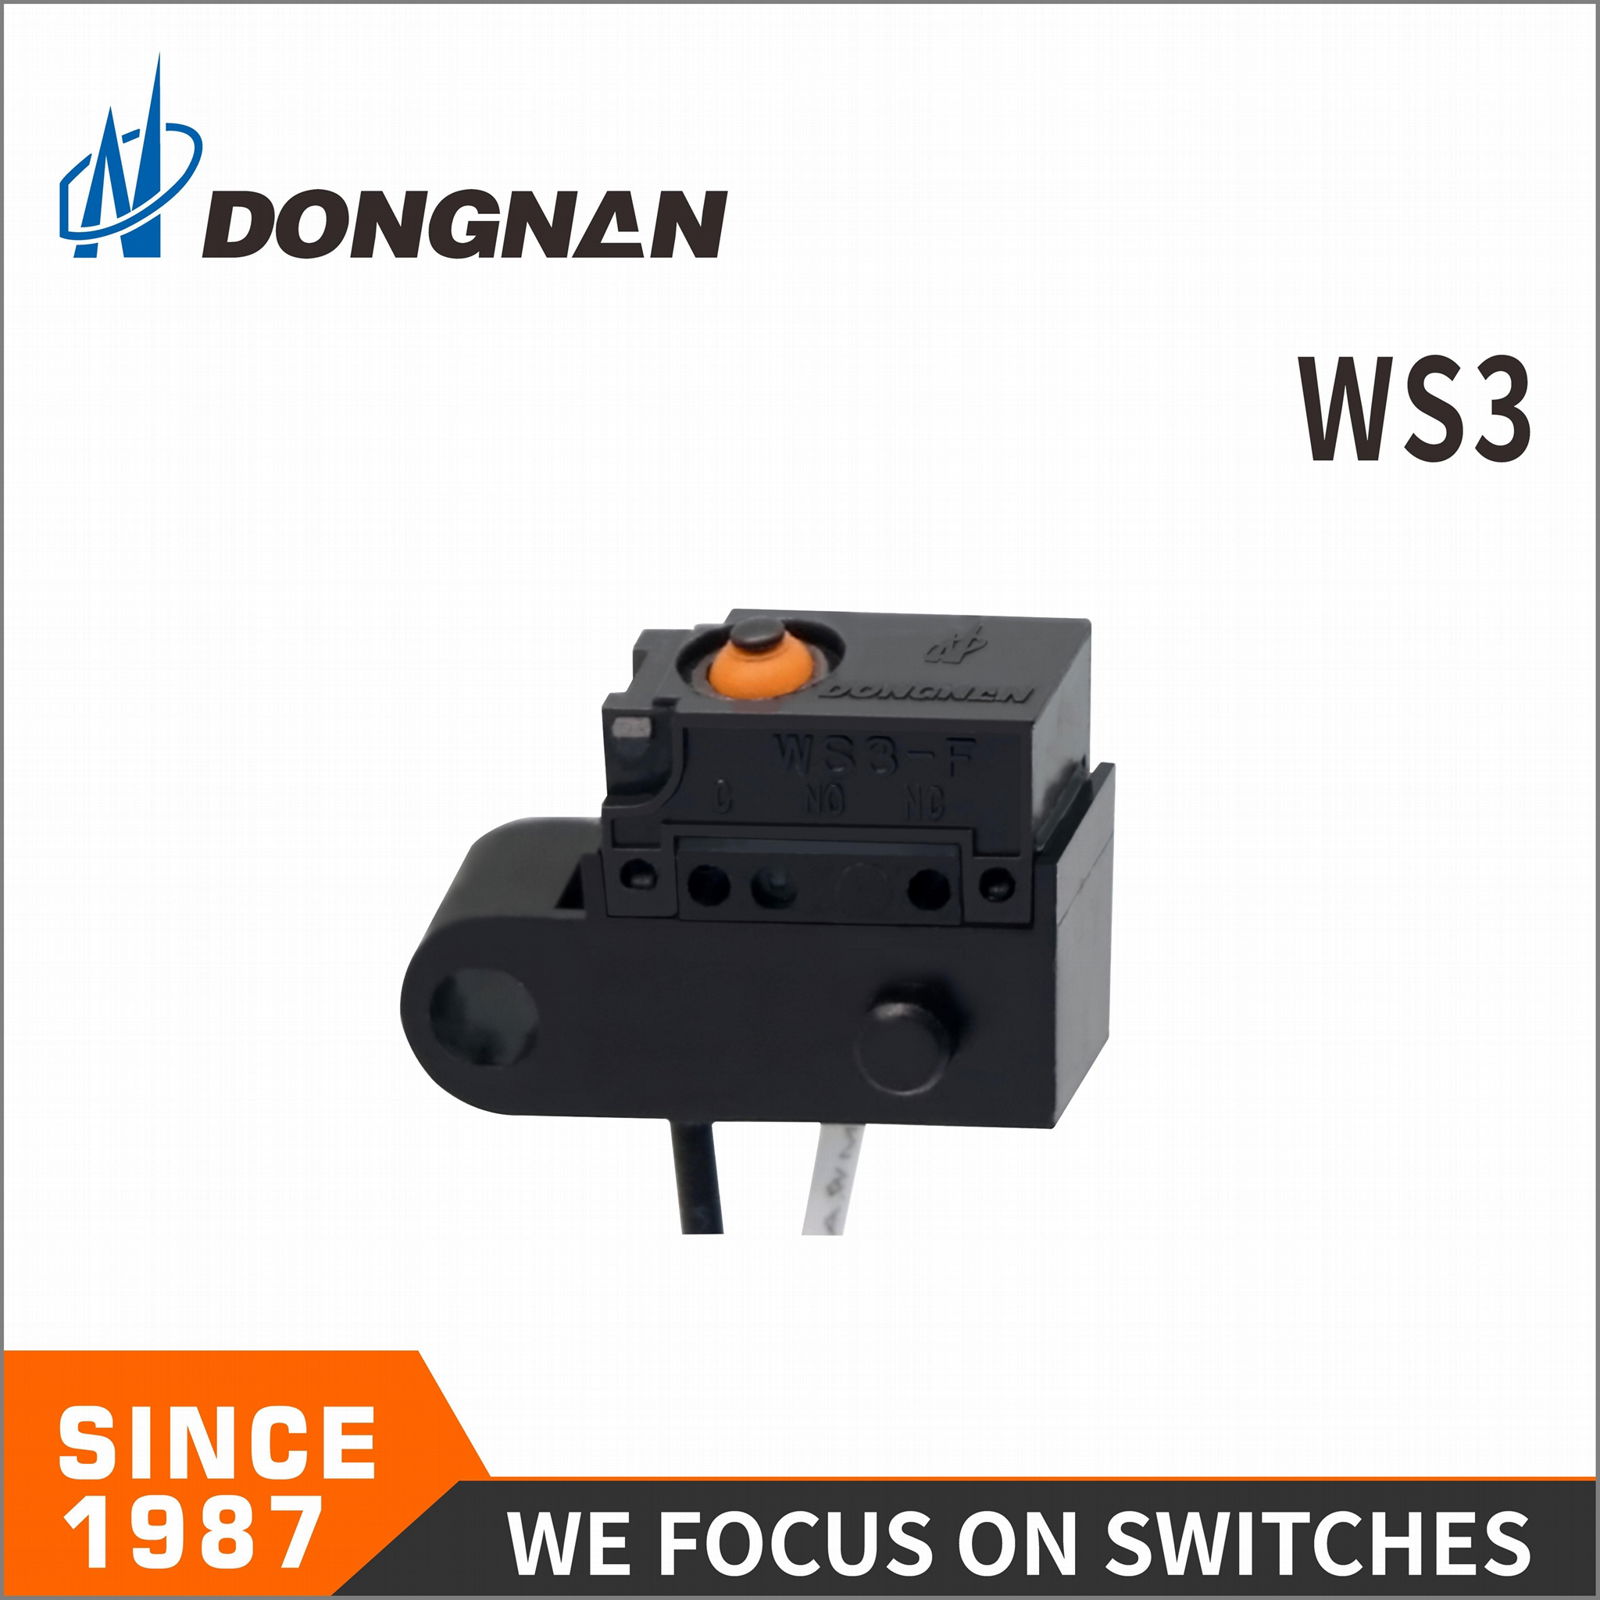 WS3 waterproof micro switch price purchase and distribution 4